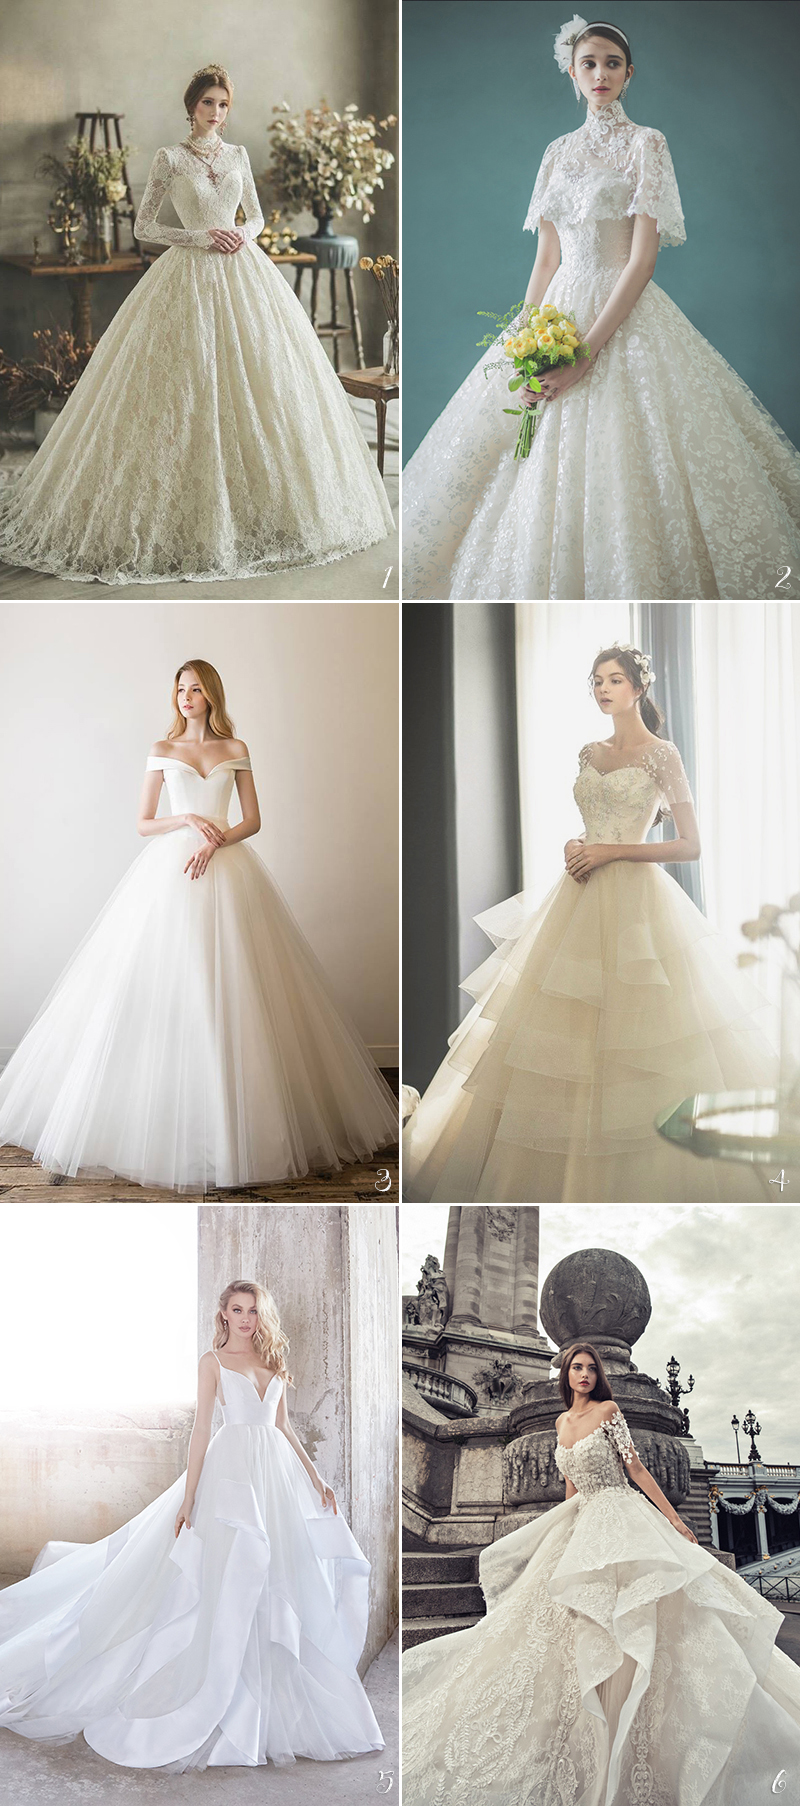 18 of the Most Wanted Wedding Dresses ...